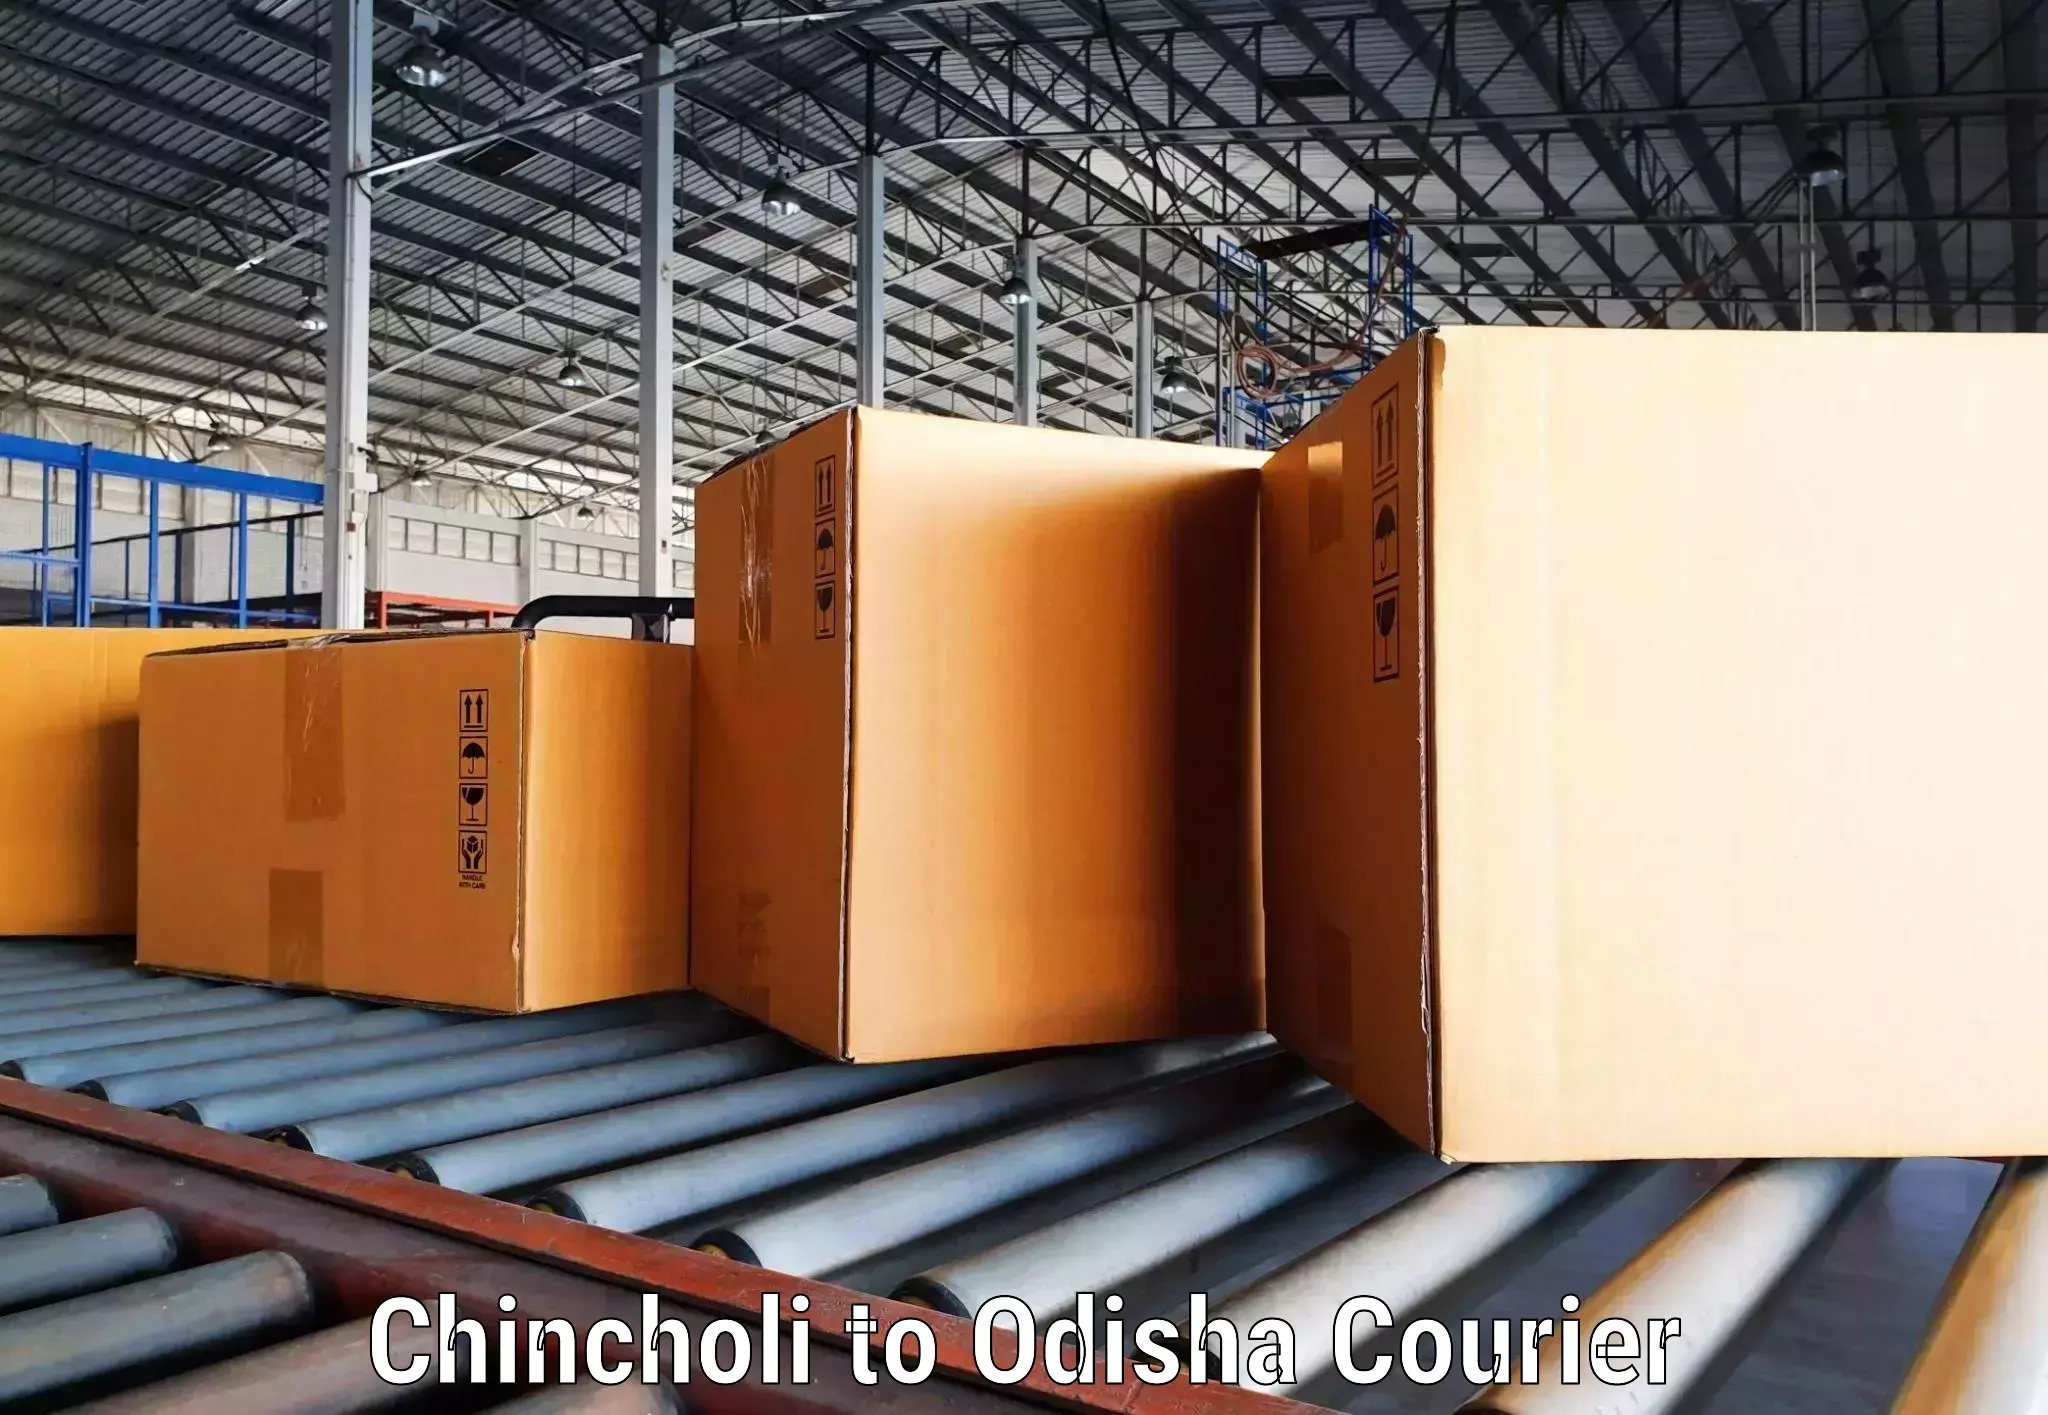 State-of-the-art courier technology Chincholi to Jaipatna